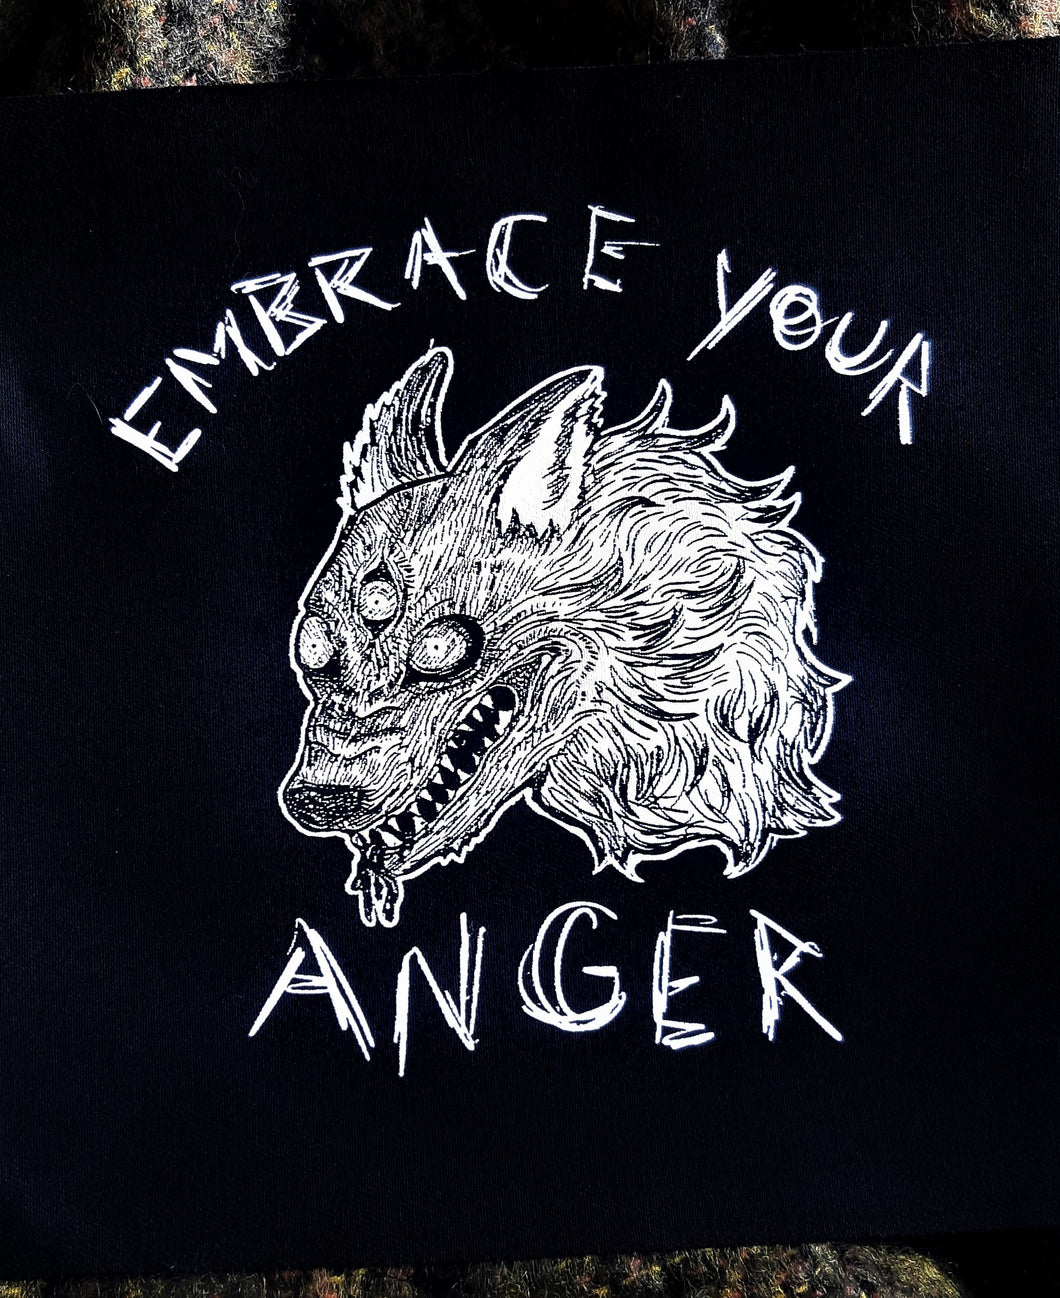 Angry Wolf backpatch - Embrace your anger - Screen printing on black fabric